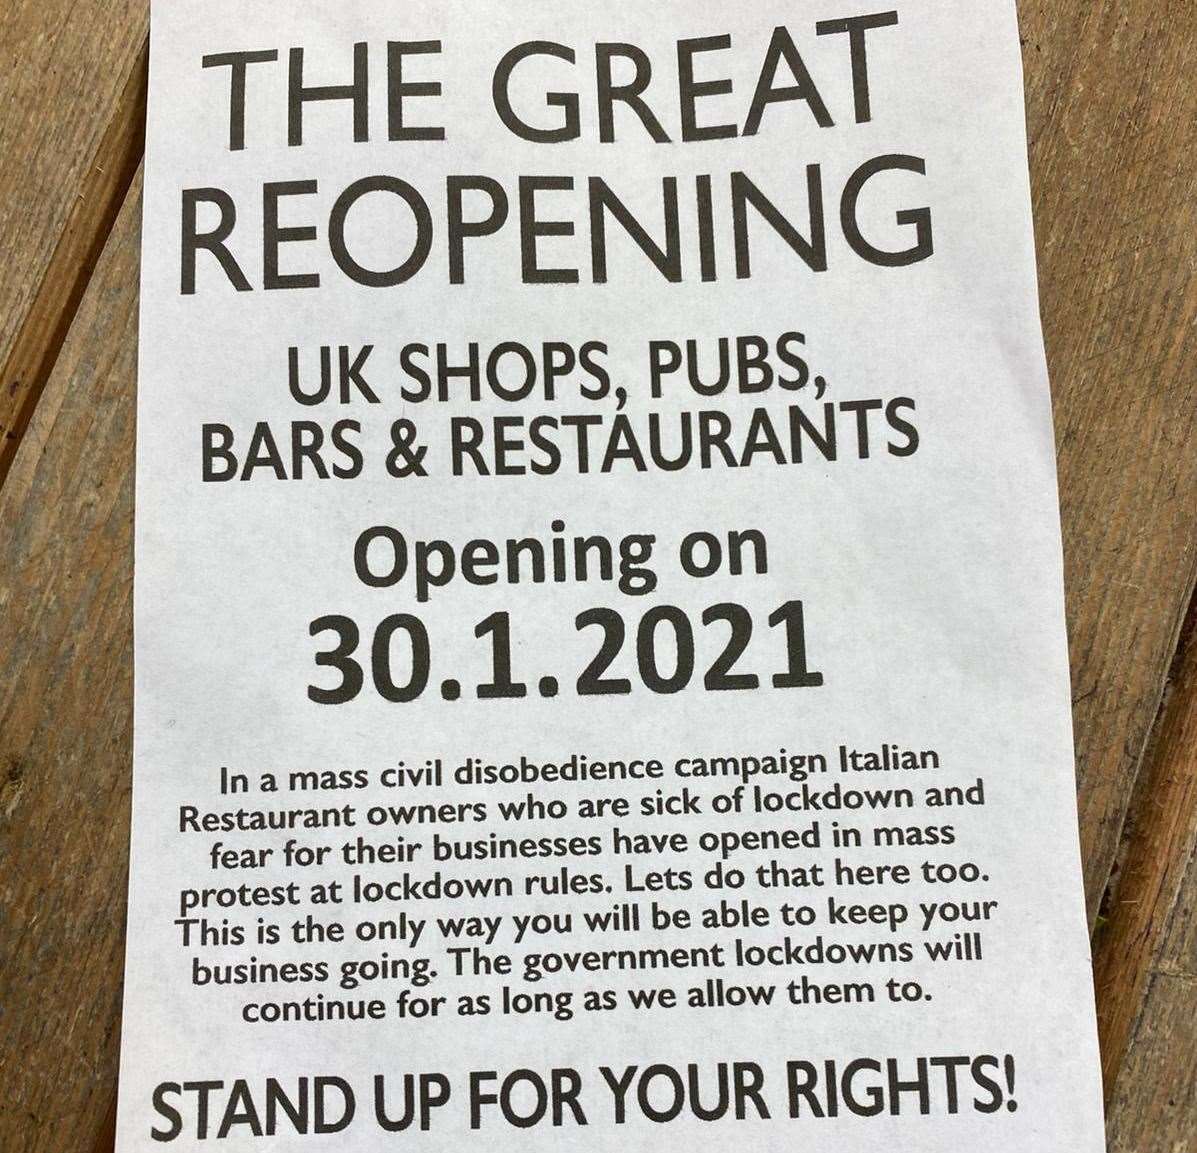 A leaflet has been sent to businesses encouraging them to reopen despite the national lockdown